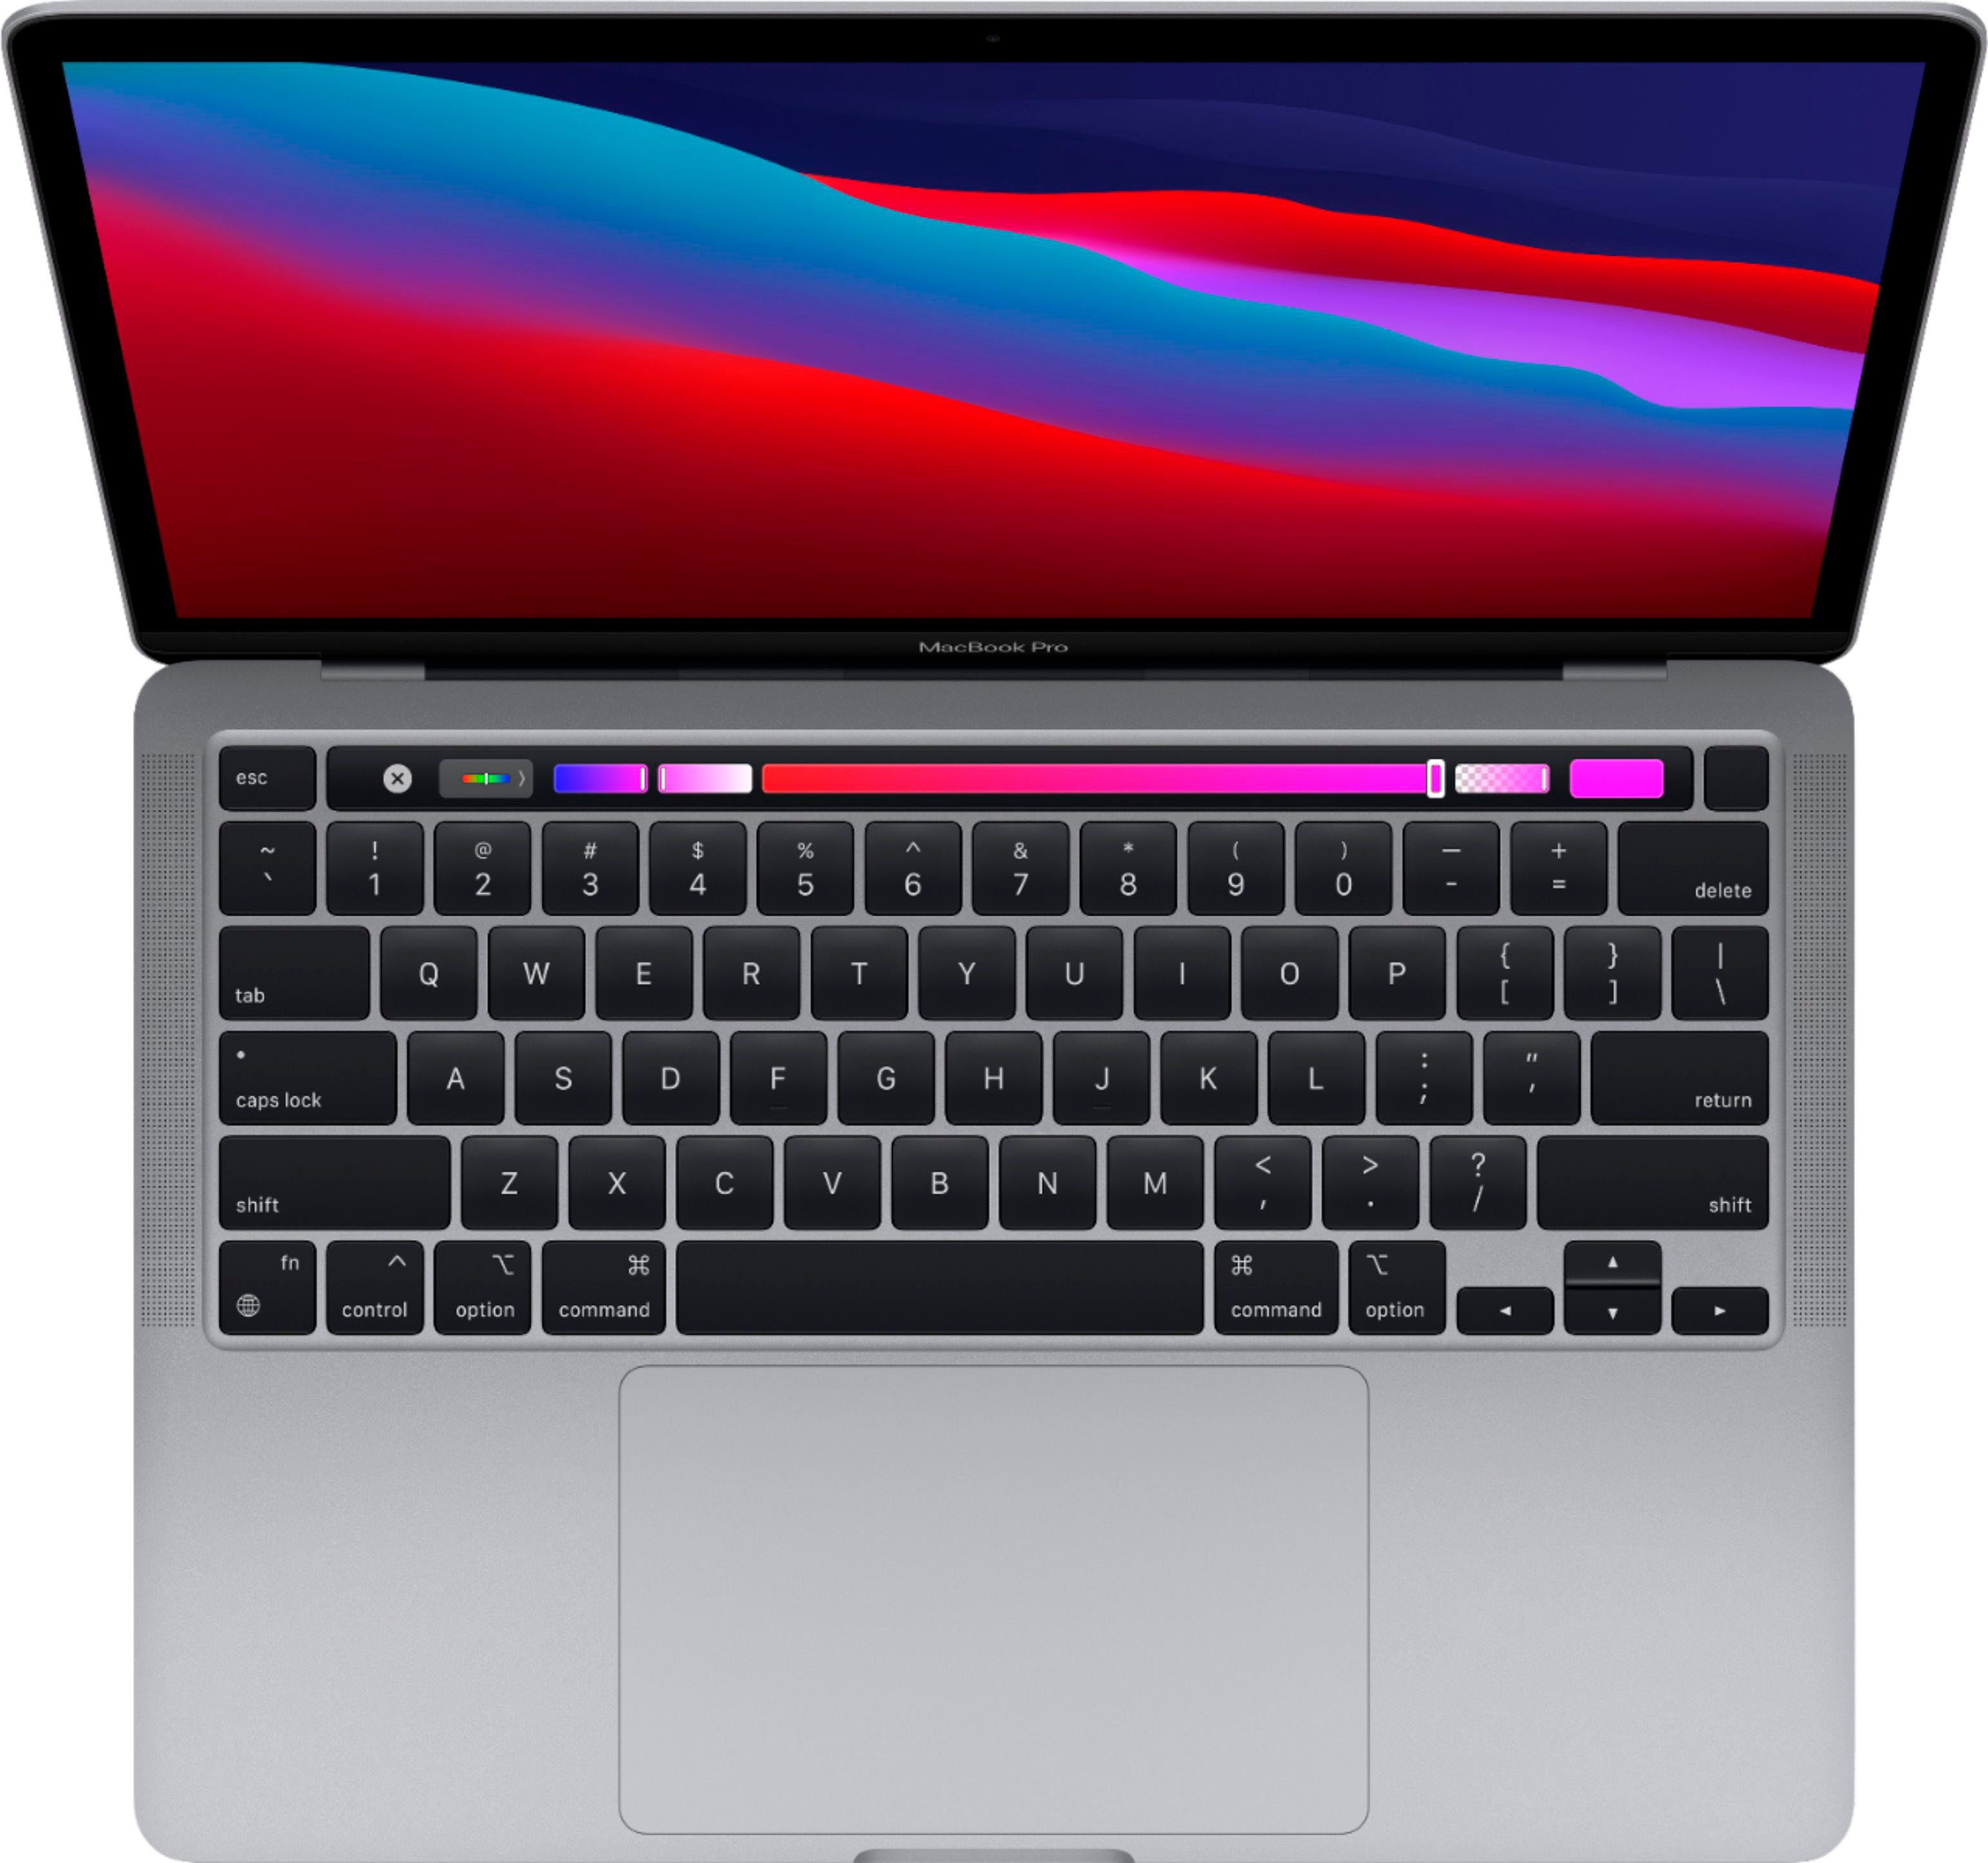 Geek Squad Certified Refurbished MacBook Pro 13.3" Laptop - Apple M1 chip - 8GB Memory - 256GB SSD (Latest Model) - Space Gray